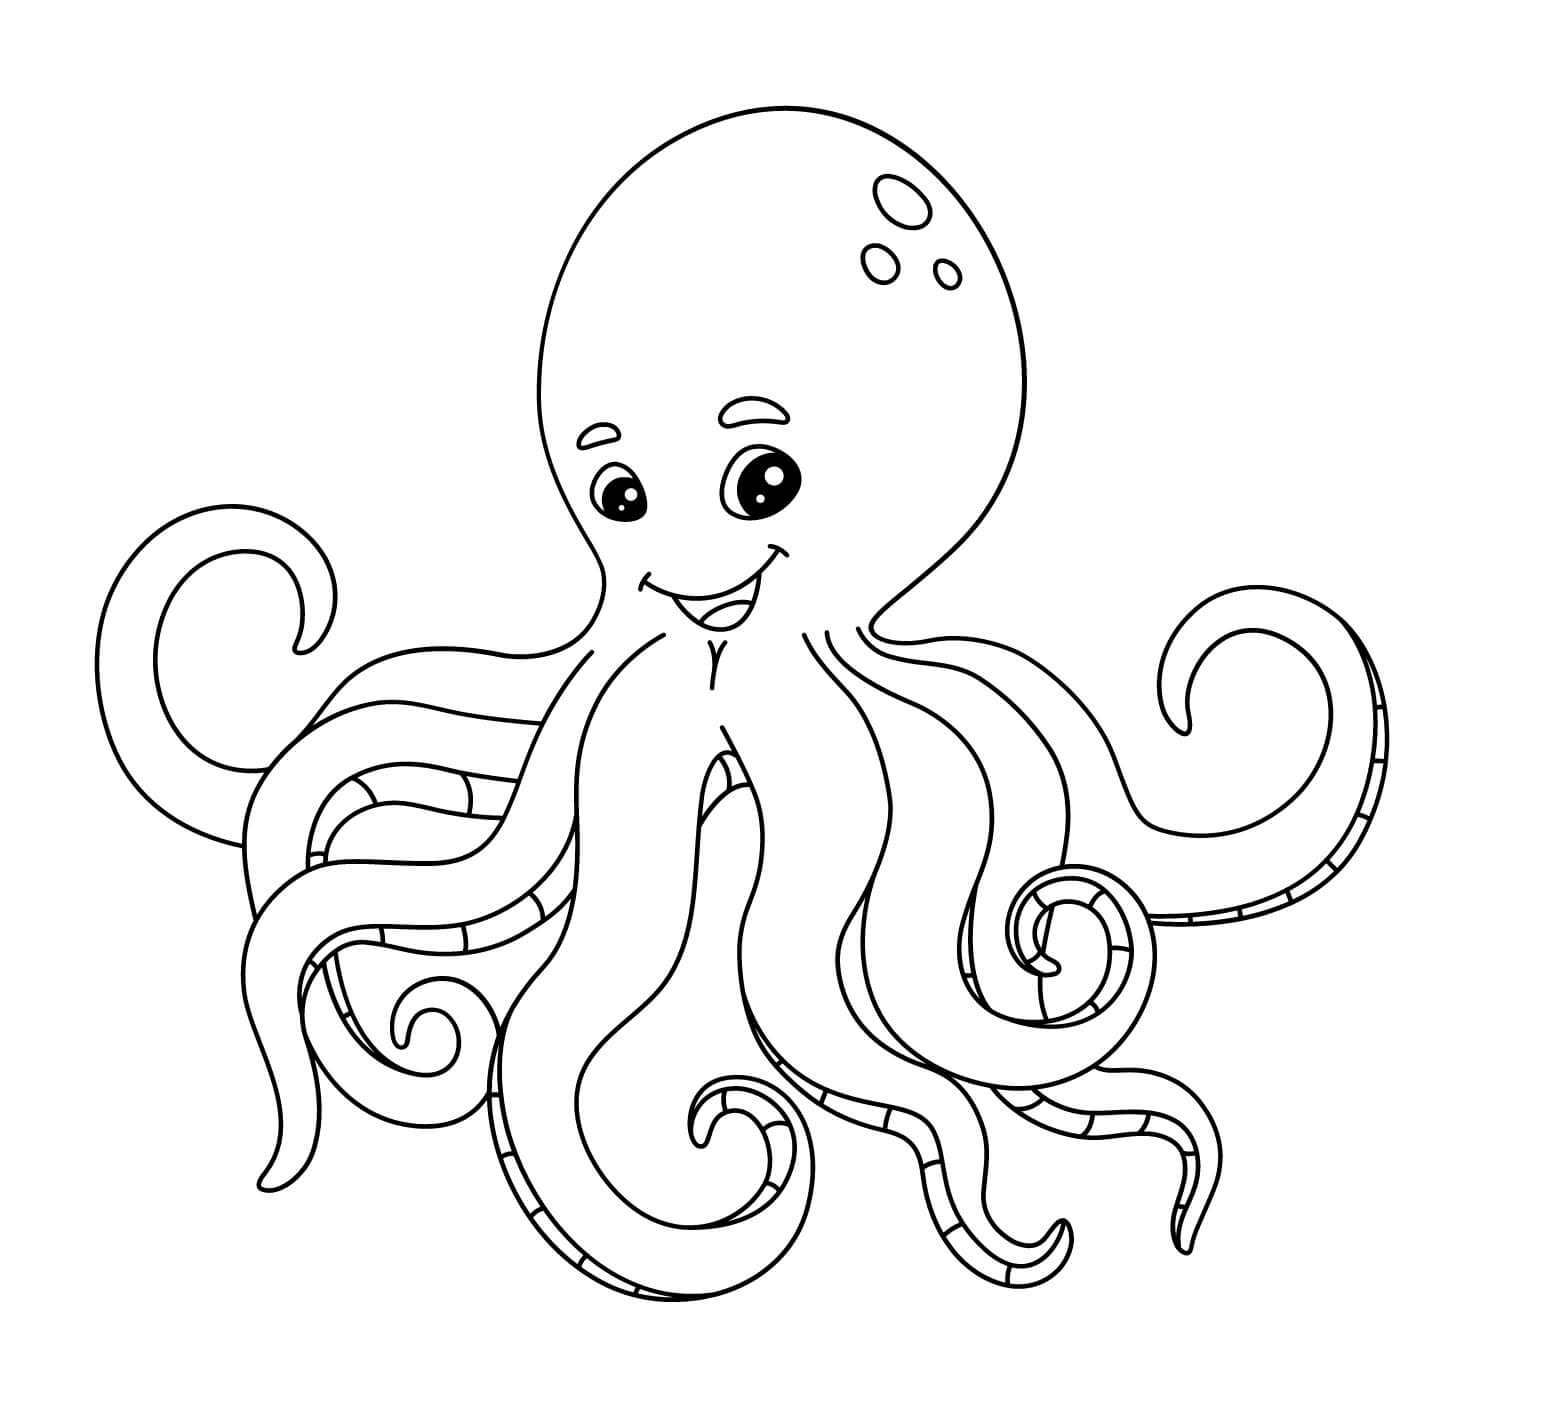 Perfect Octopus coloring page - Download, Print or Color Online for Free